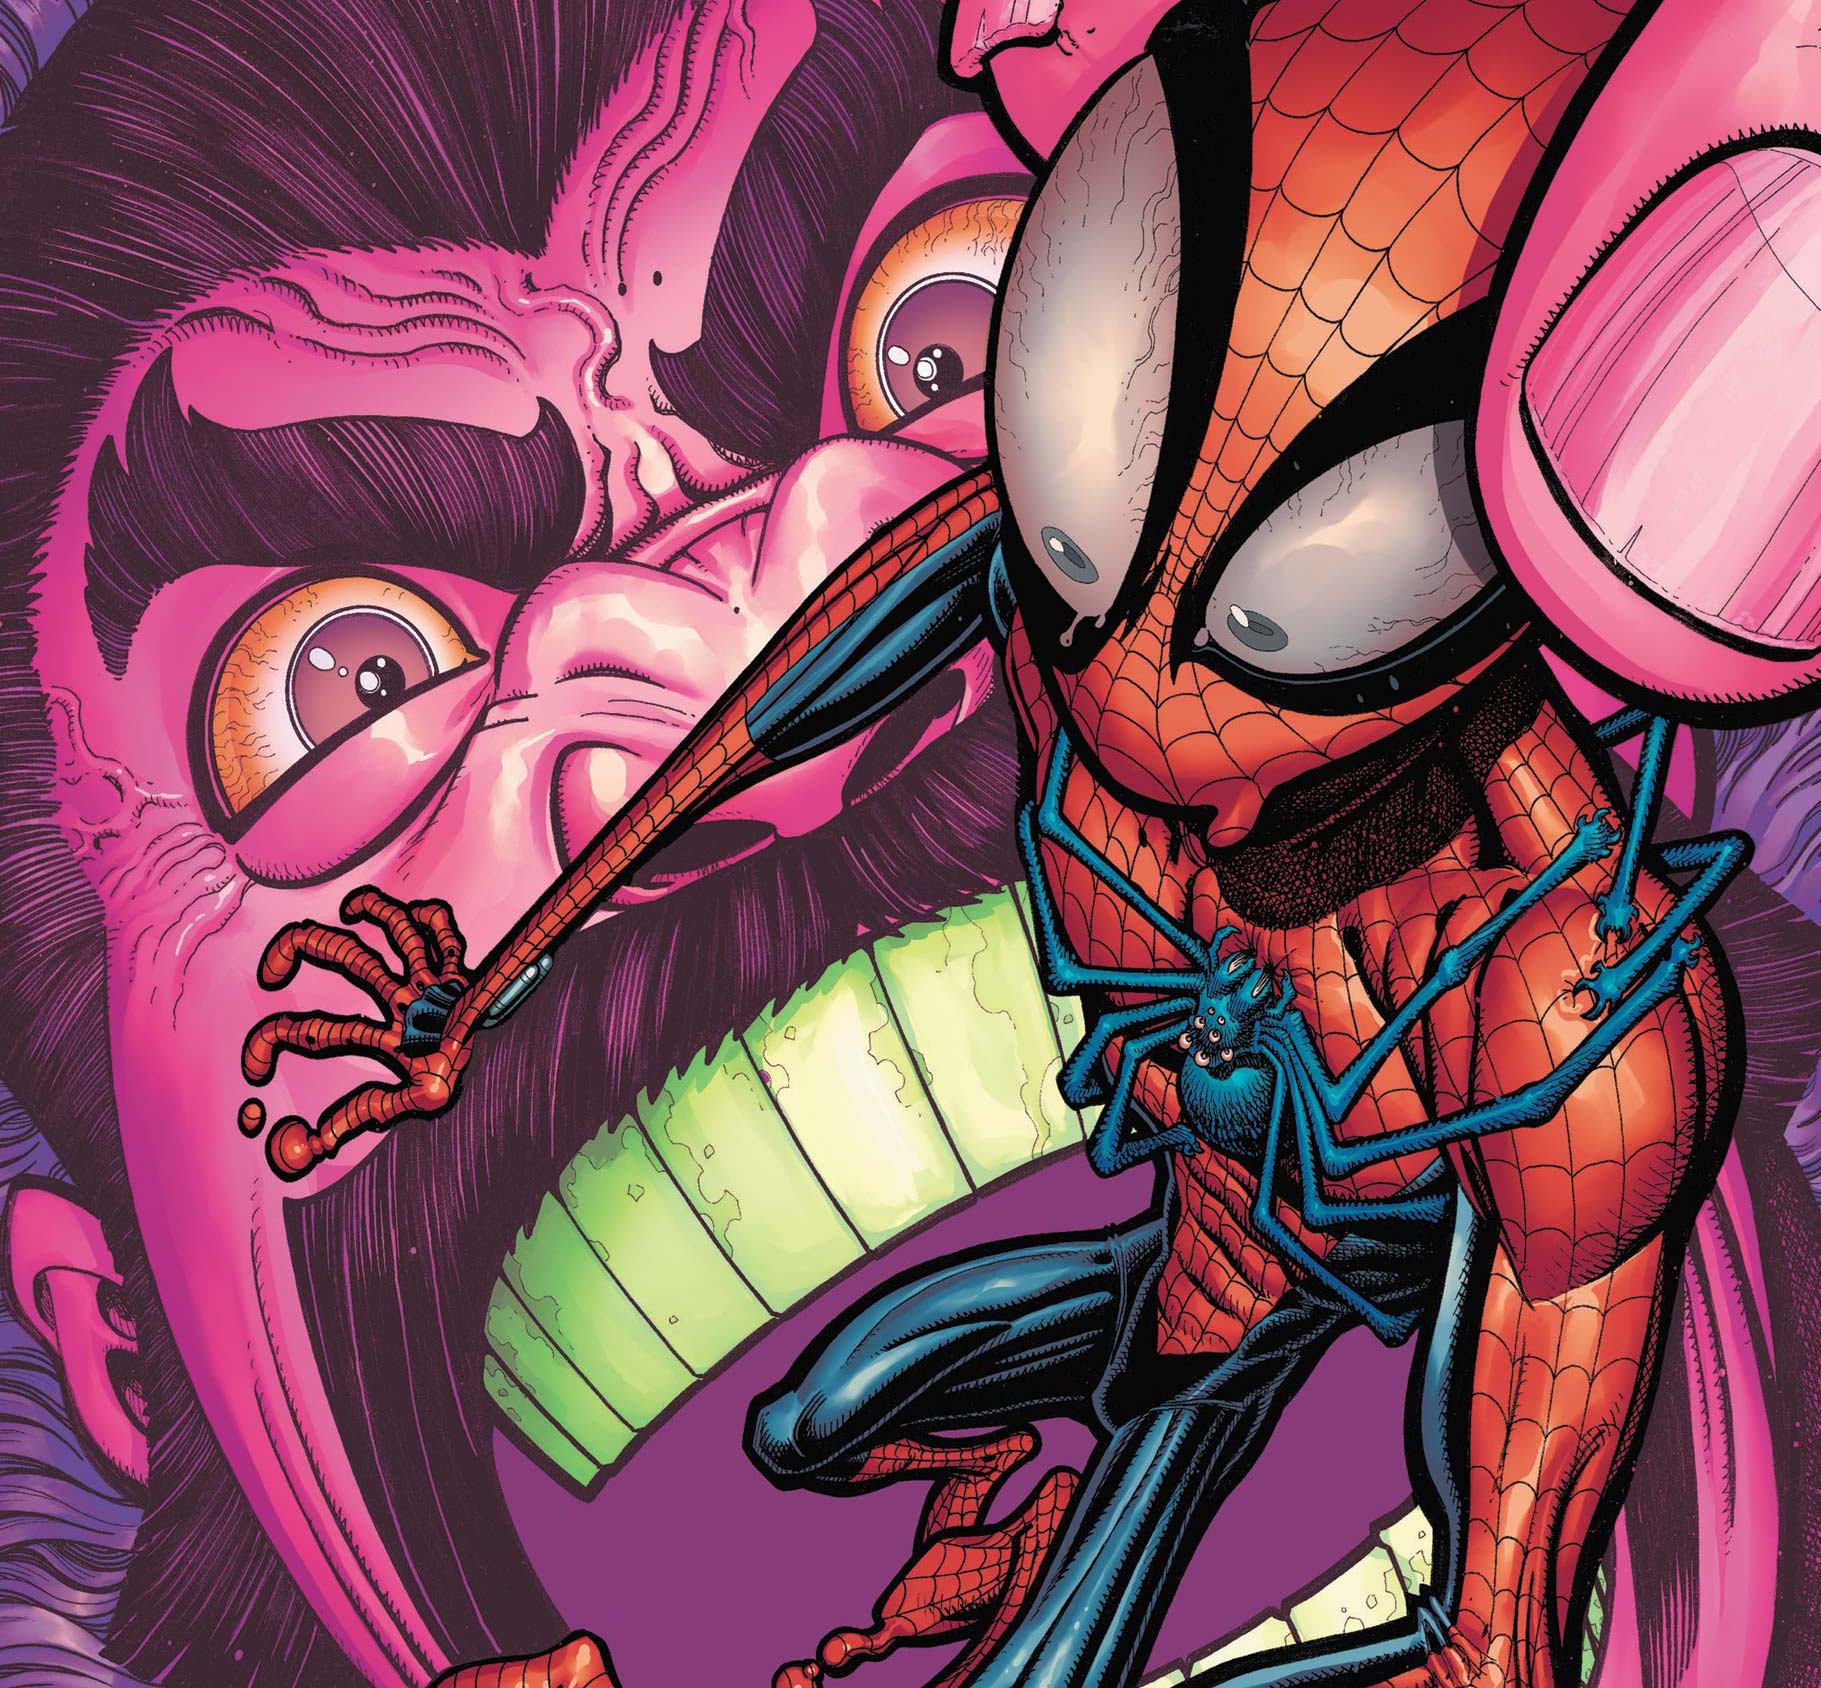 'Amazing Spider-Man' #80 offers a trippy fight with Kraven